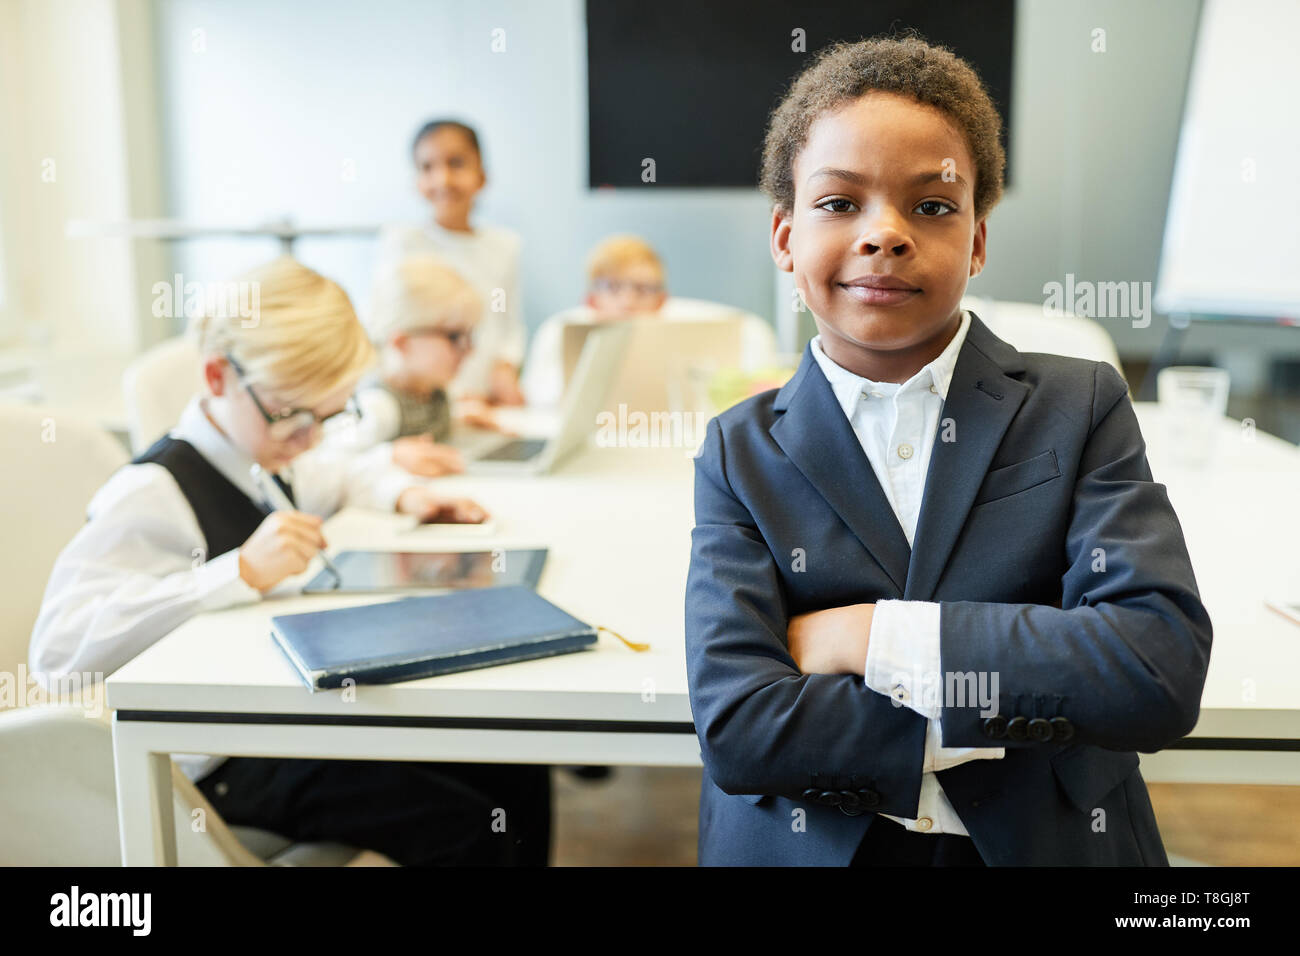 African boy as manager or consultant with crossed arms in front of team Stock Photo